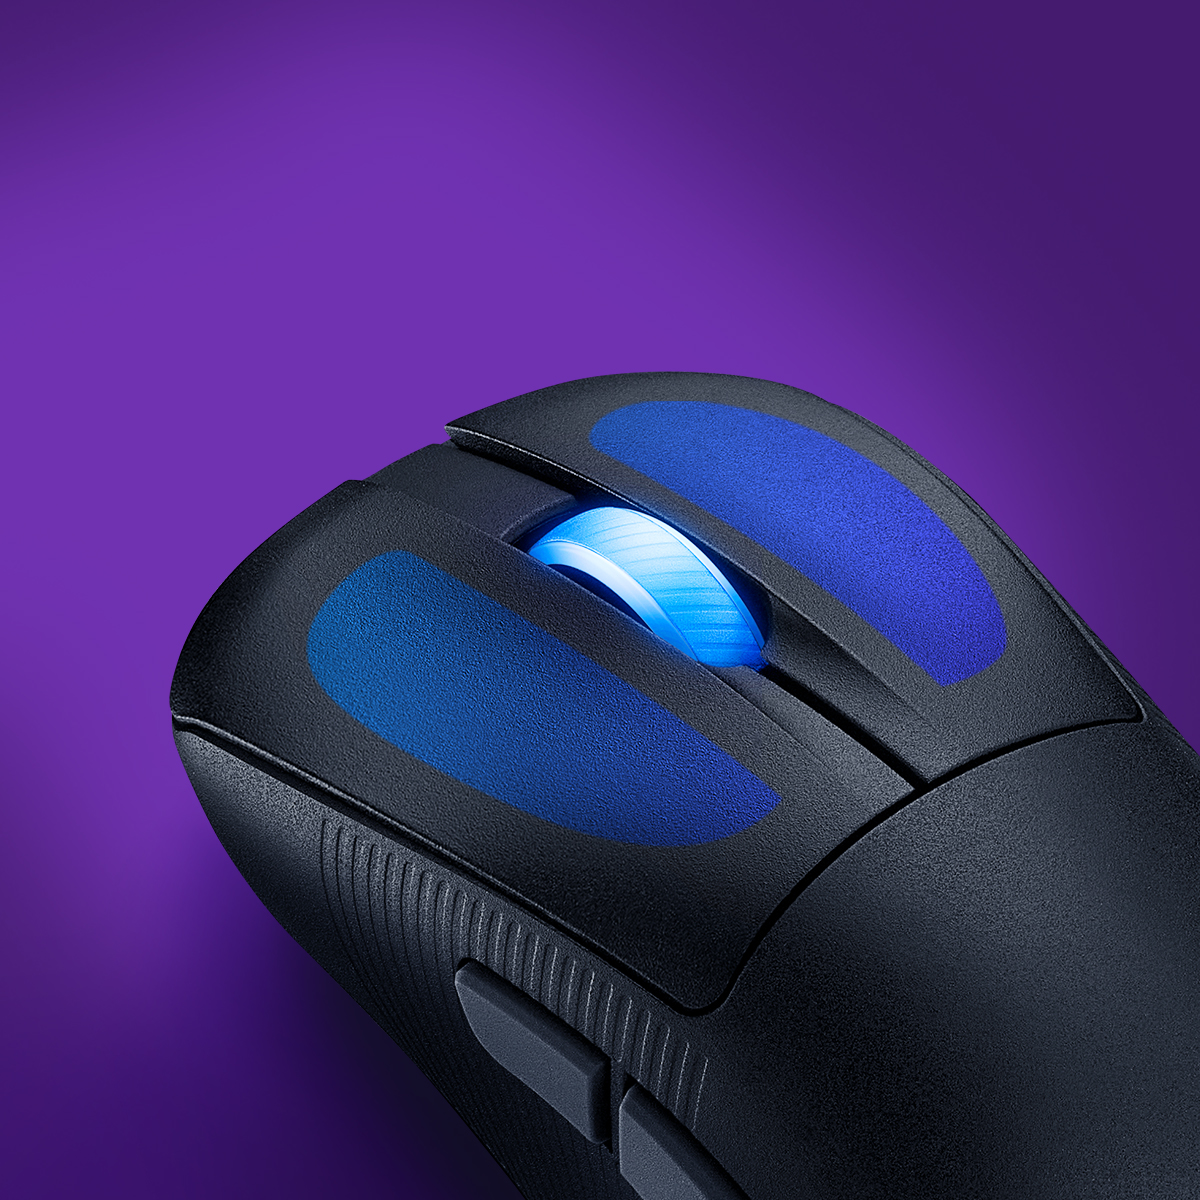 No more wrist strains with #ROGKerisIIAce! ​ 1️⃣54g ultra-lightweight​ 2️⃣Elevated hump that runs along your palm​ 3️⃣Extended side ledge to place your ring finger​ 4️⃣Contoured L/R buttons for a snug finger rest​ Join the #PerfectYourPrecision giveaway: rog.gg/PerfectYourPre…